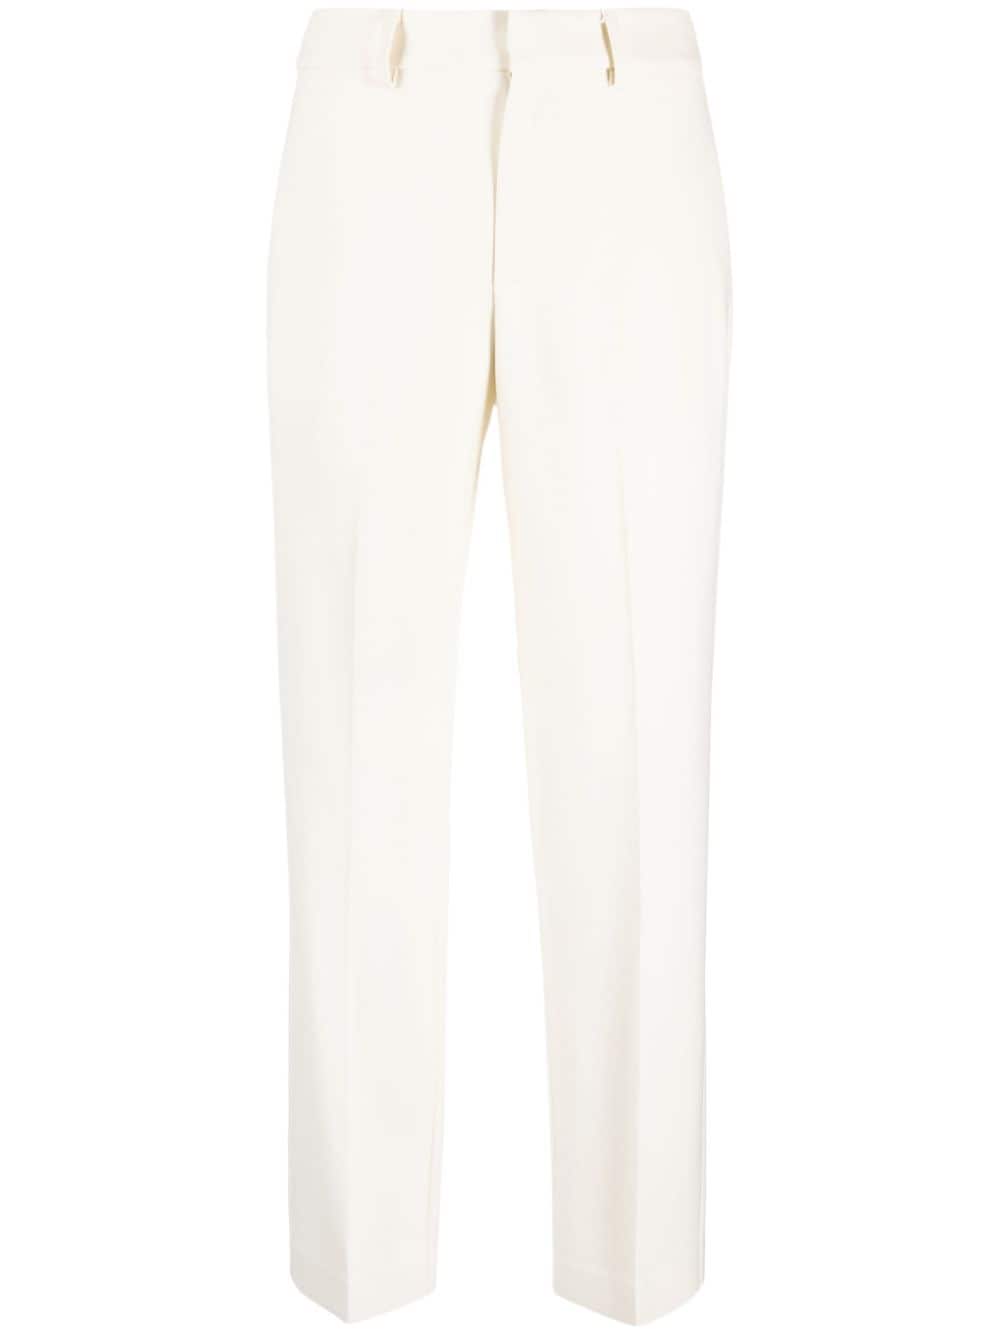 P.A.R.O.S.H. tapered-leg tailored trousers - White